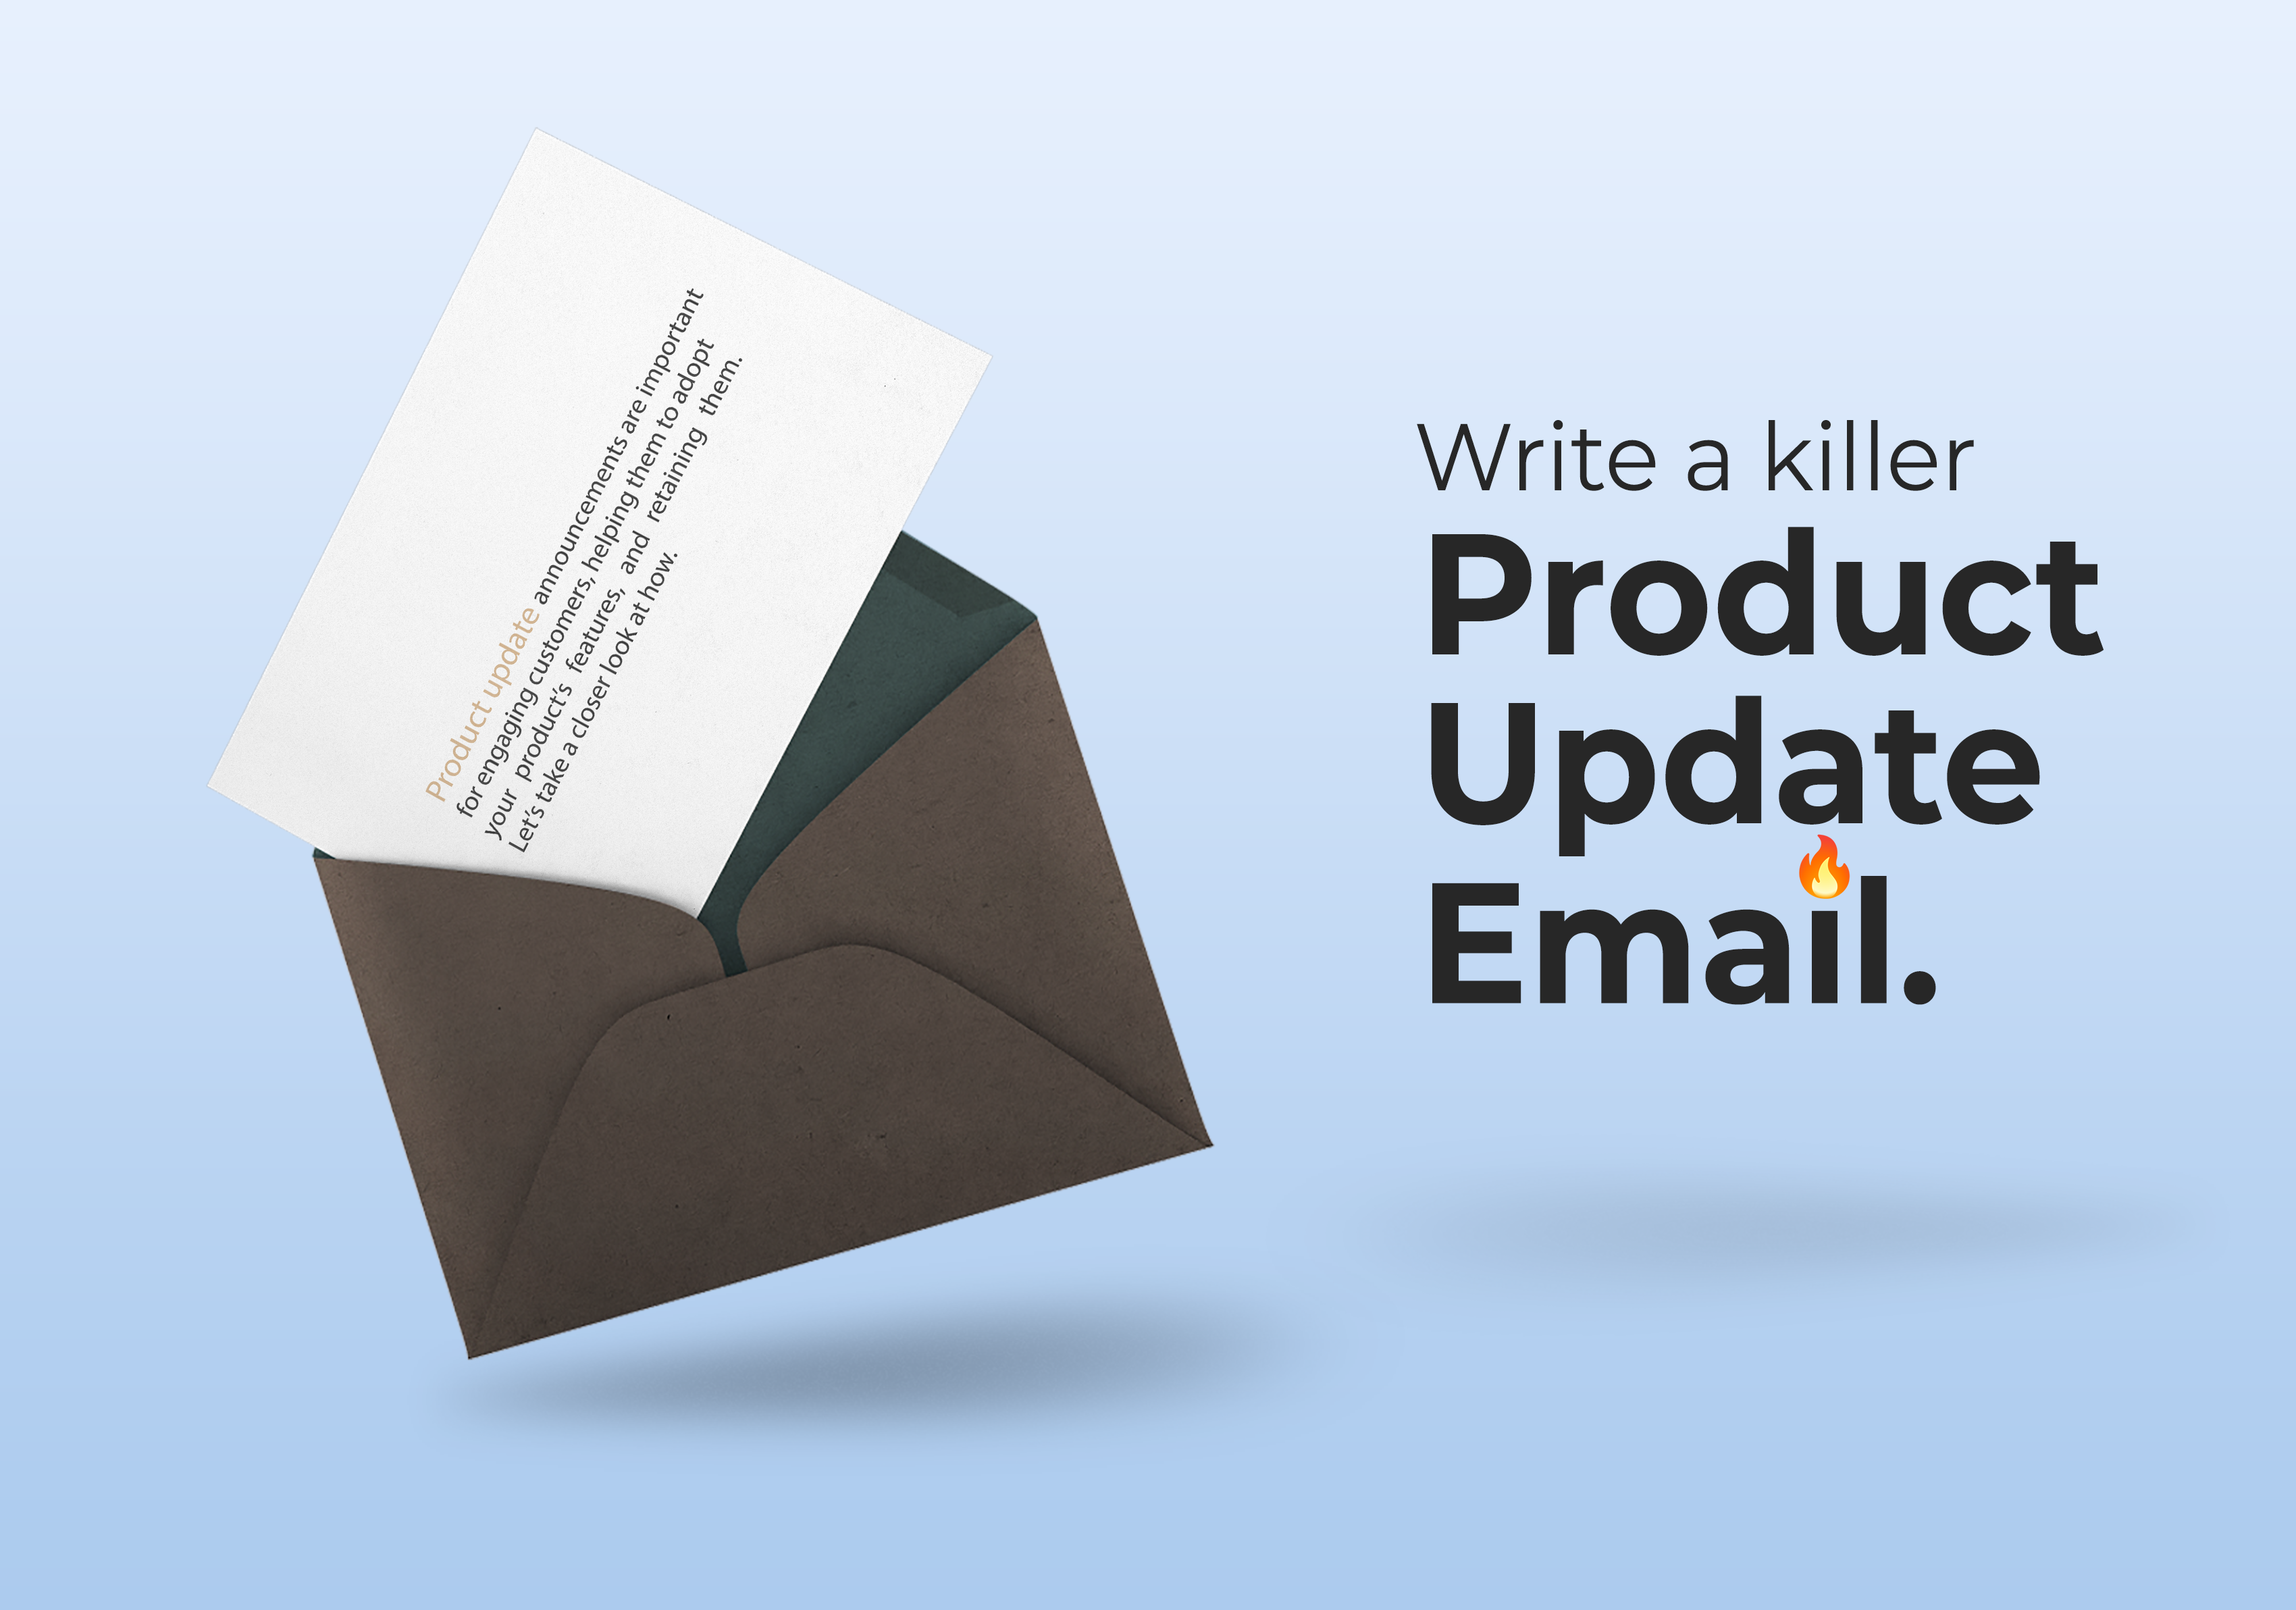 How to write a killer product update email [with examples]